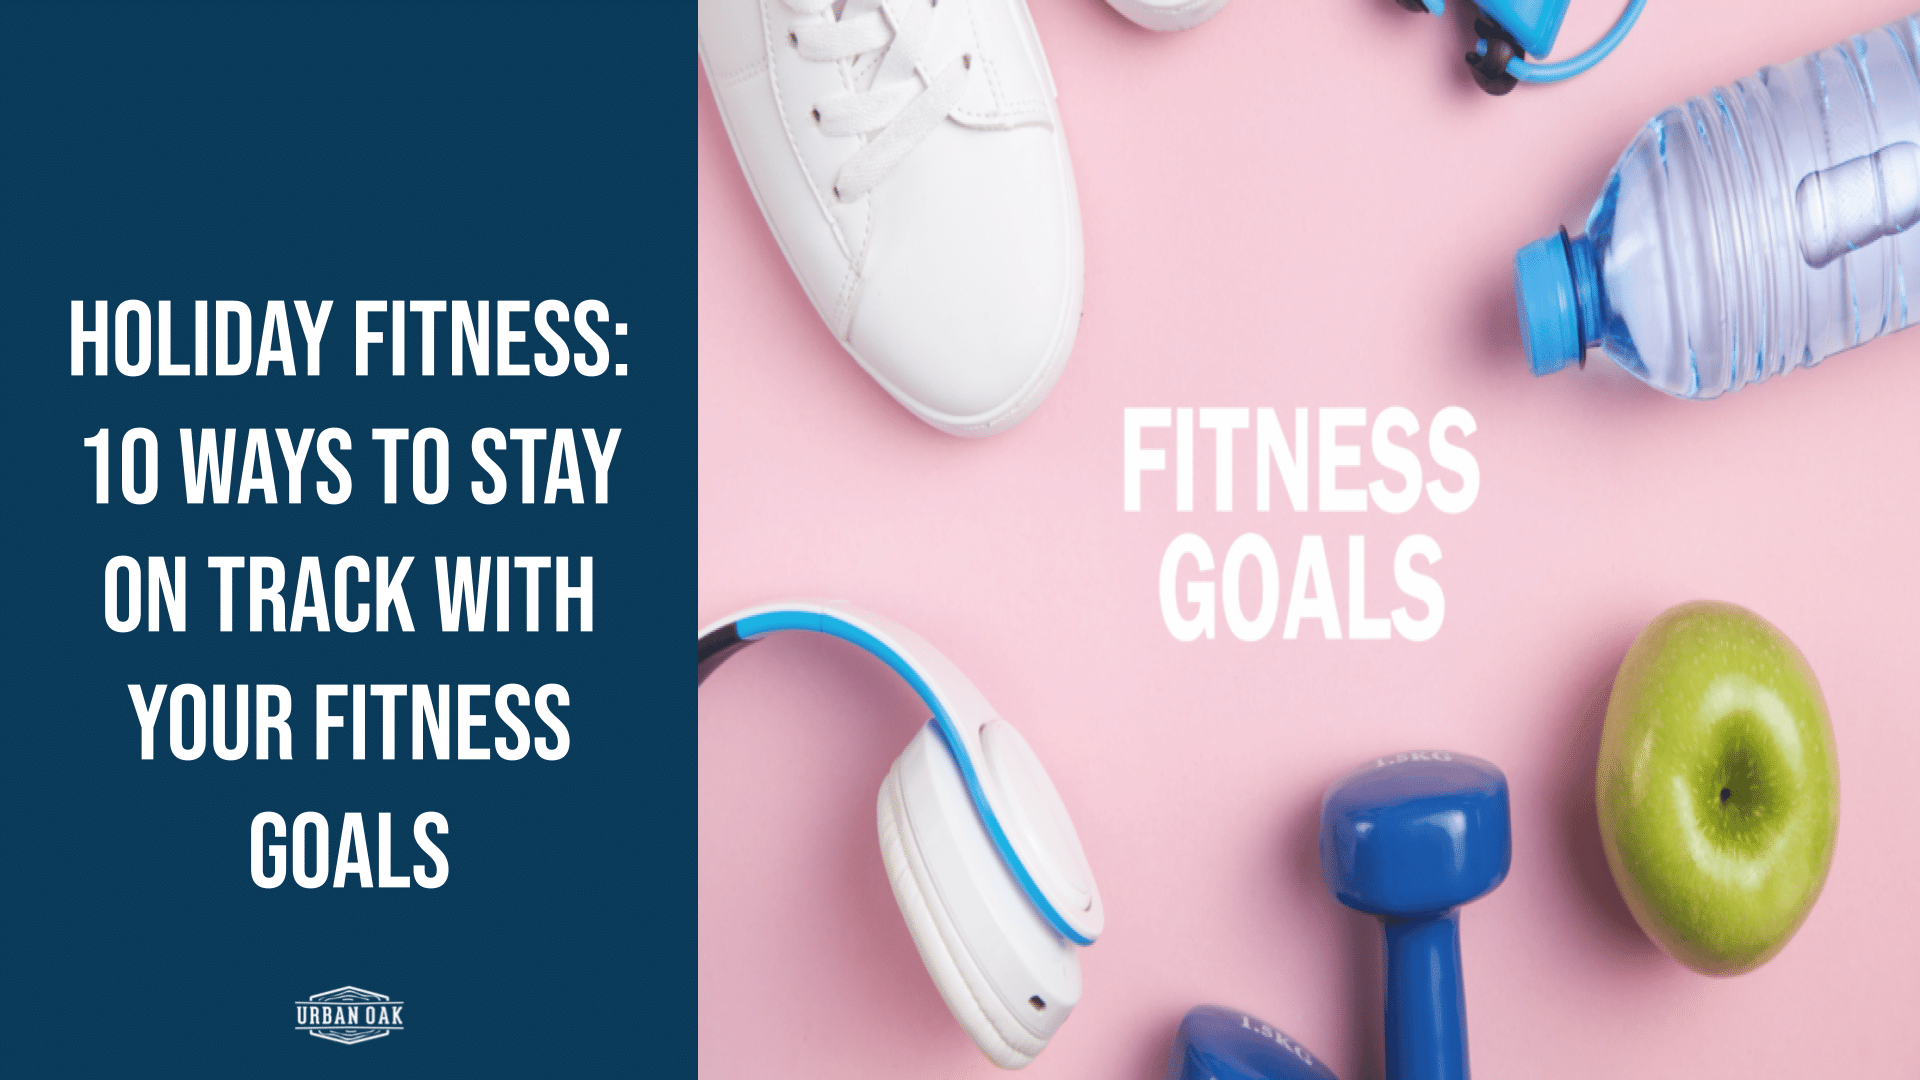 Holiday Fitness: 10 Ways to Stay on Track With Your Fitness Goals